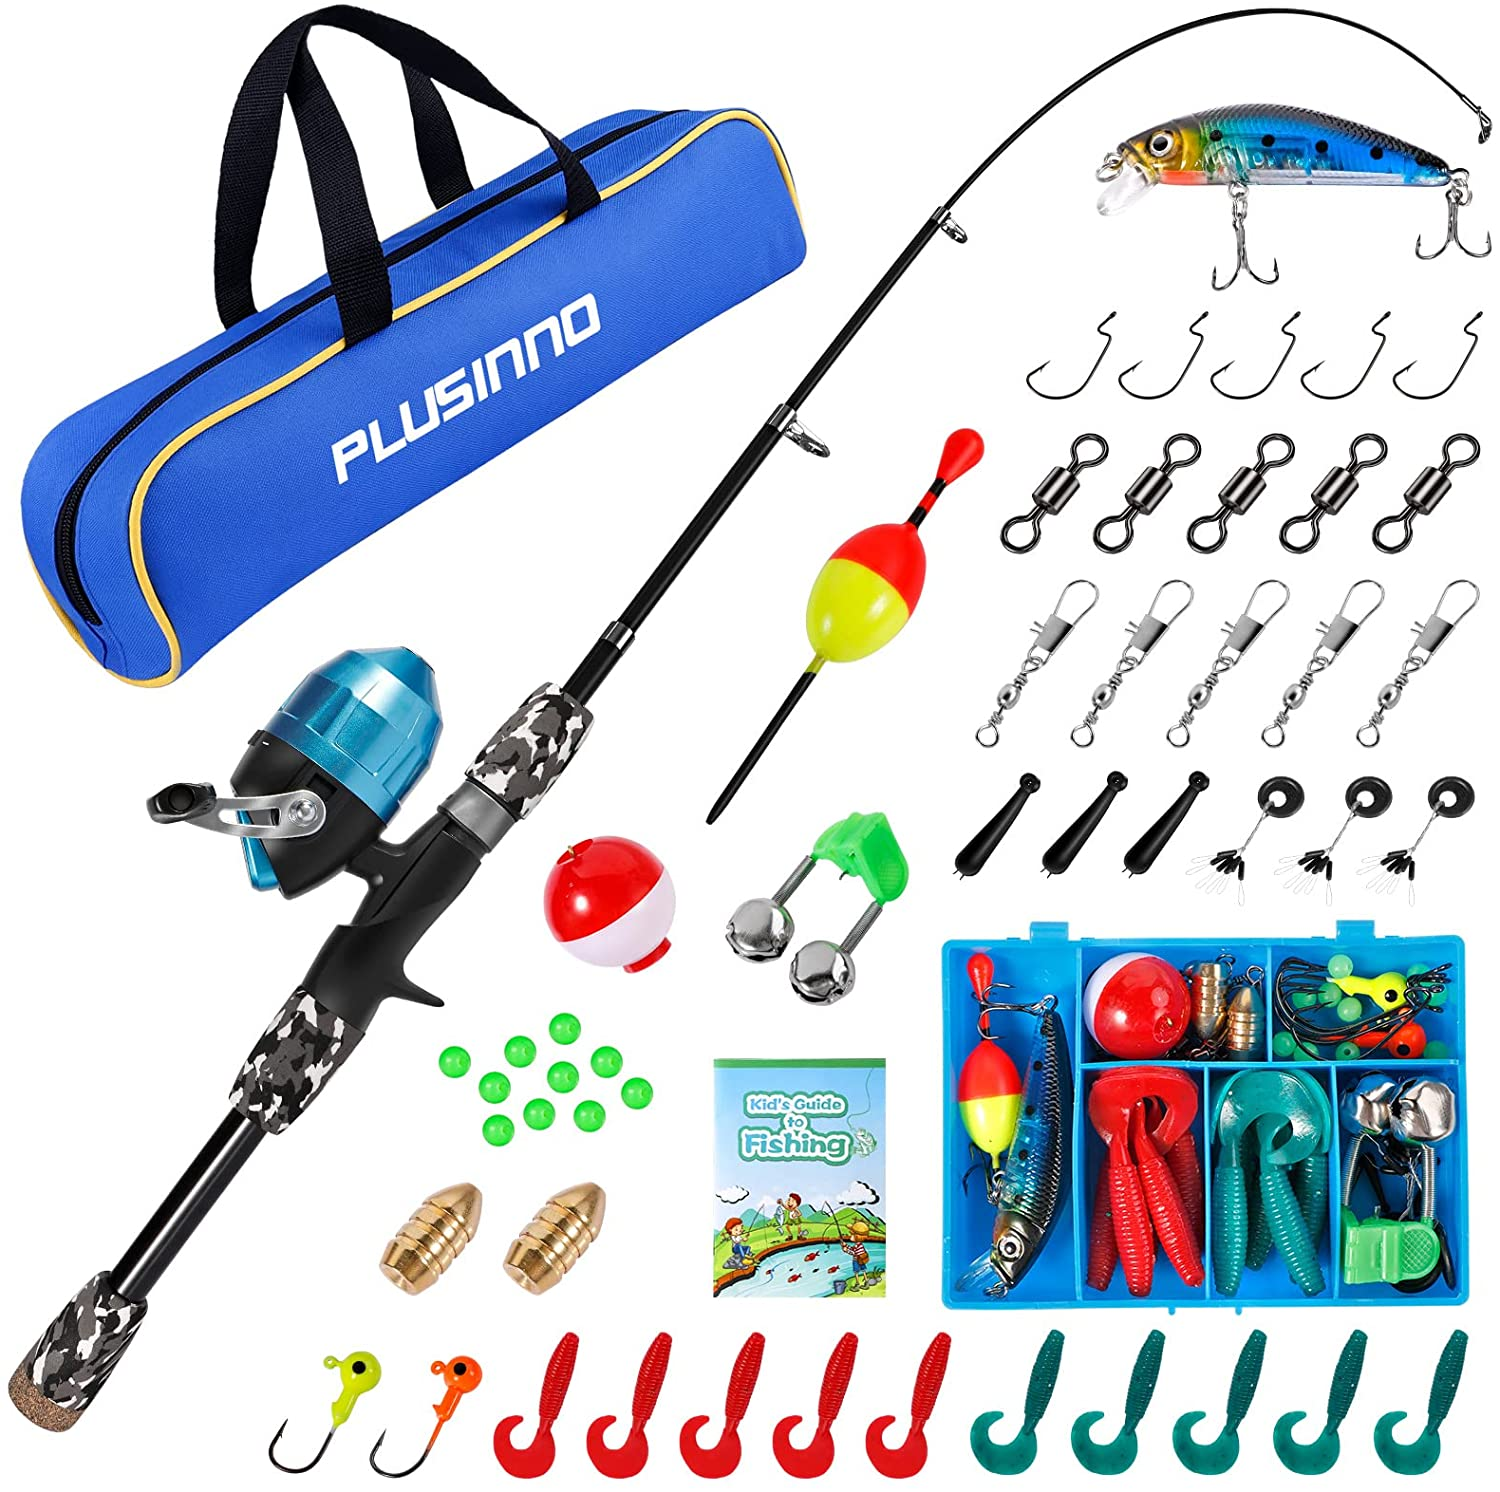 PLUSINNO Fishing Rod and Reel Combos - Complete Kit for Novice Anglers